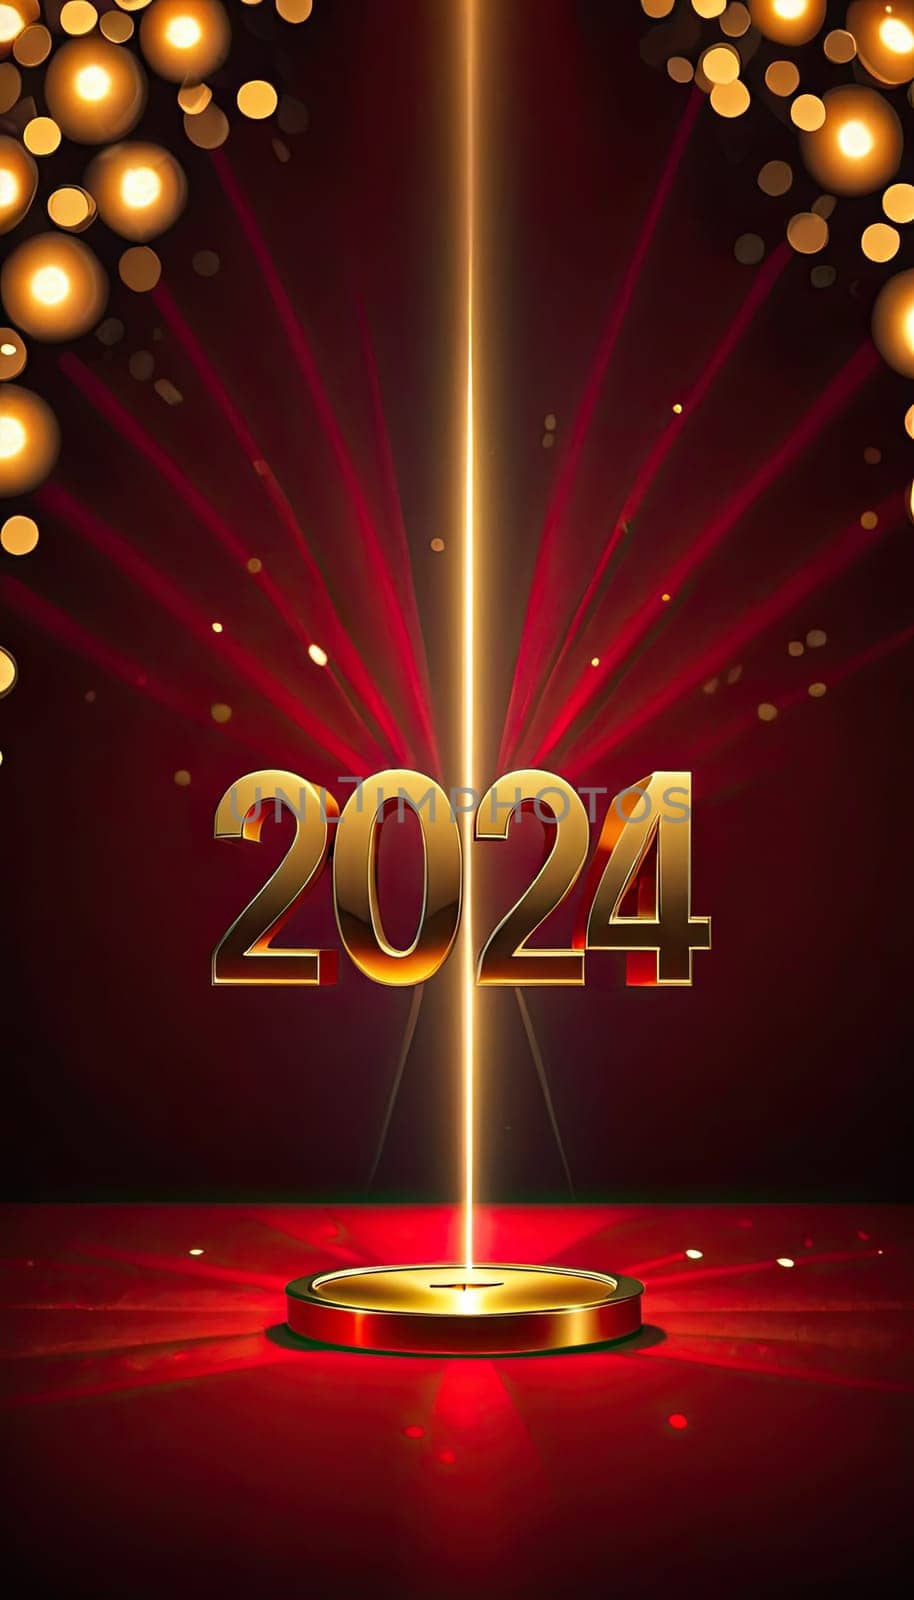 Golden digits 2024 on dark red background with bokeh lights, festive atmosphere, ideal for New Year event promotions